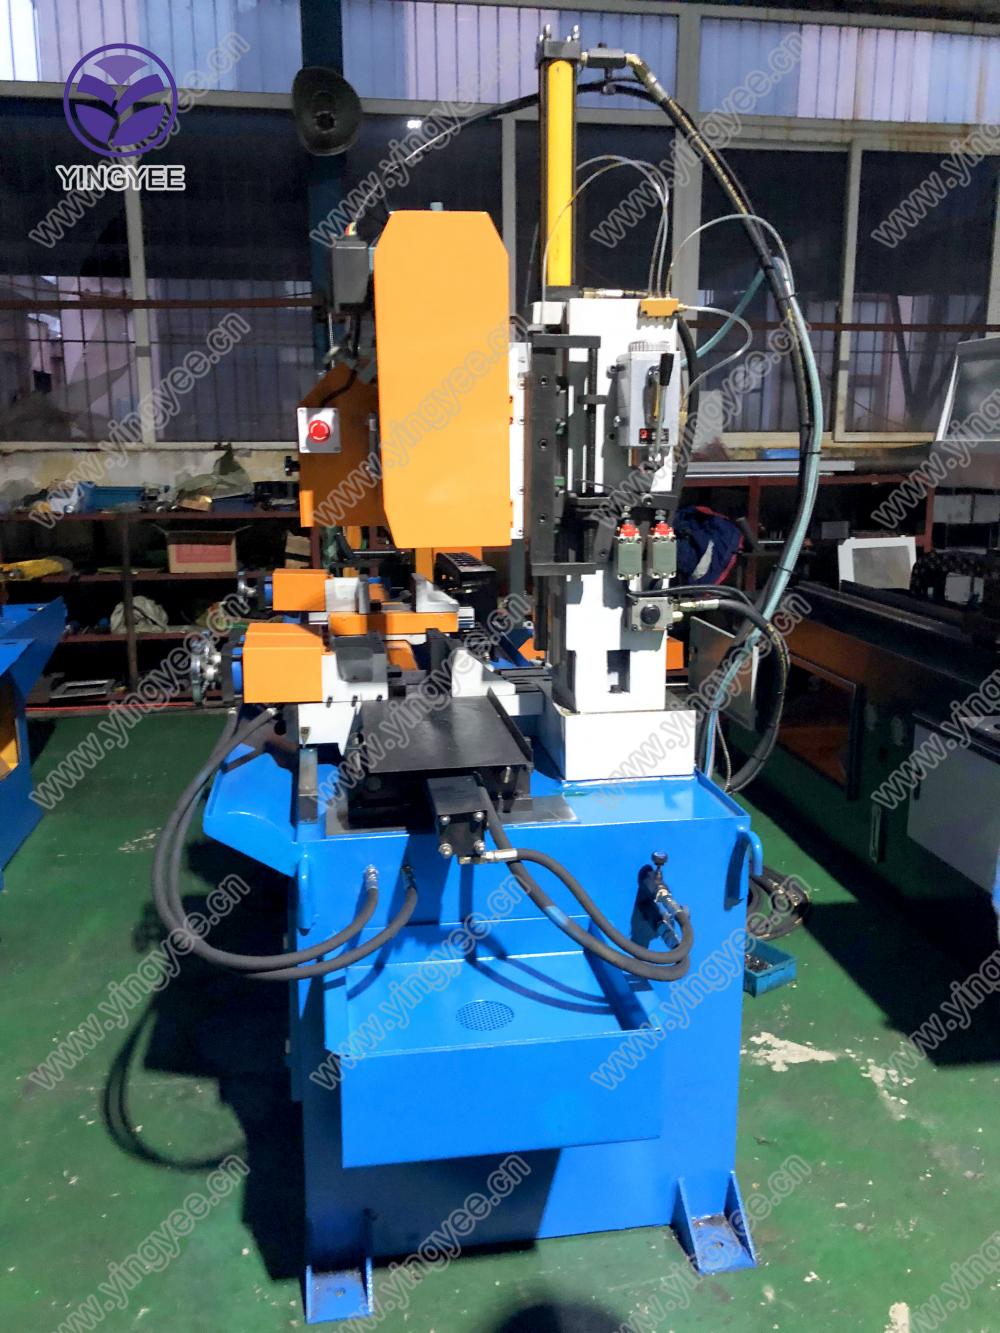 Auto Metal Pipe Cutting Machine From Yingyee001